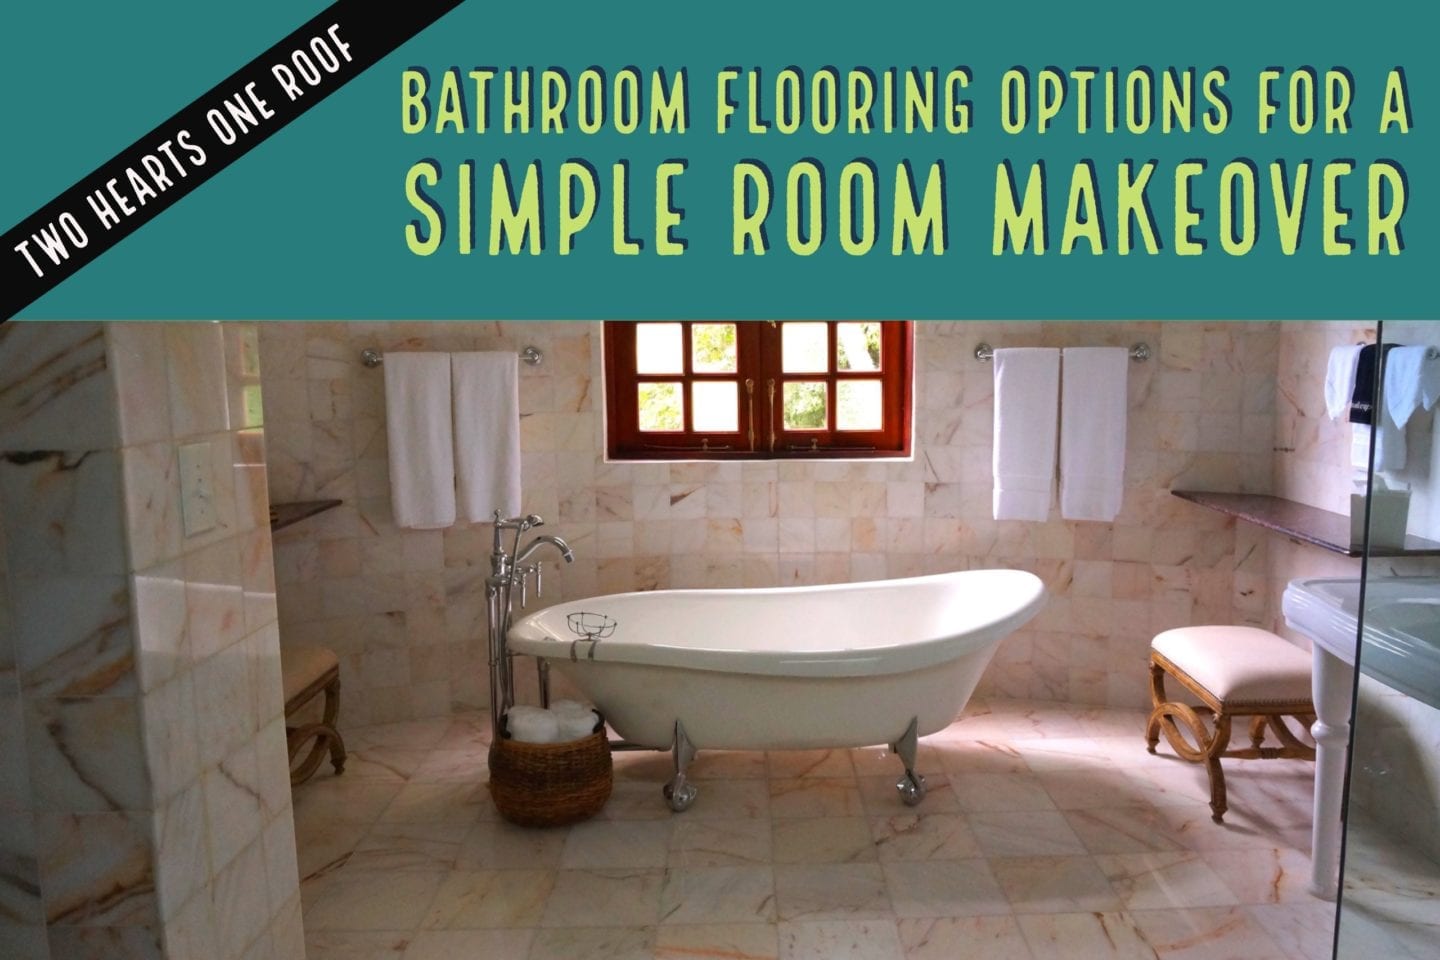 Interiors // Bathroom Flooring Options For A Simple Room Makeover